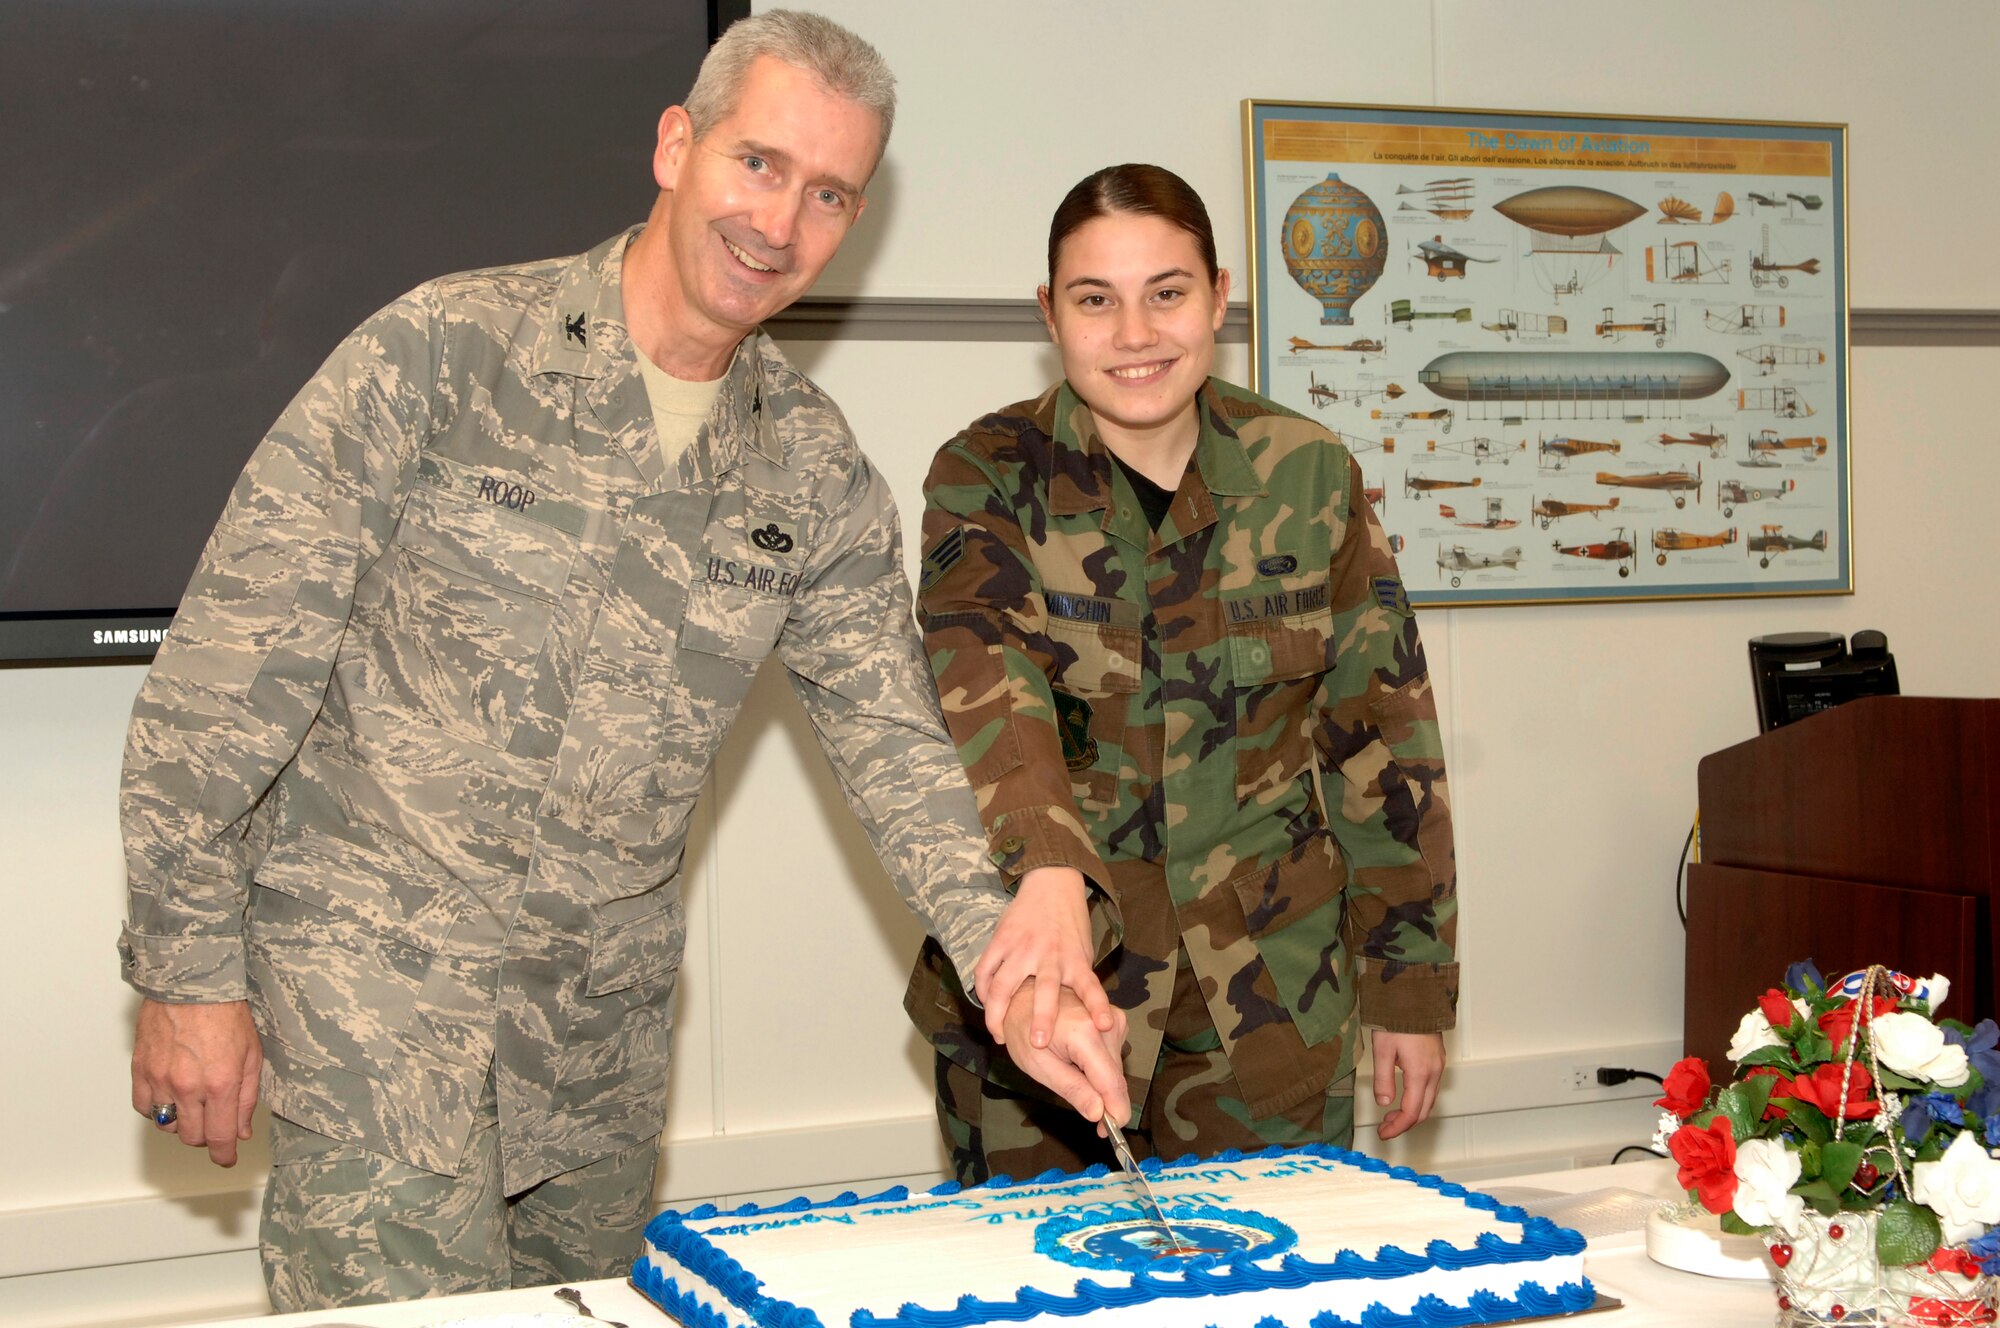 Col. Jon A. Roop, 11th Wing commander and Senior Airman Jessica Minchin, 11th Mission Support Squadron, cut cake for the opening of the new co-located Pentagon Military Personnel Flight, Airman and Family Readiness Center, Military Testing and Finance Offices, Dec. 2. The co-located offices will provide better customer service to more than 55,000 military members assigned to the Pentagon. (US Air Force photo by Mr. Thomas Dennis)